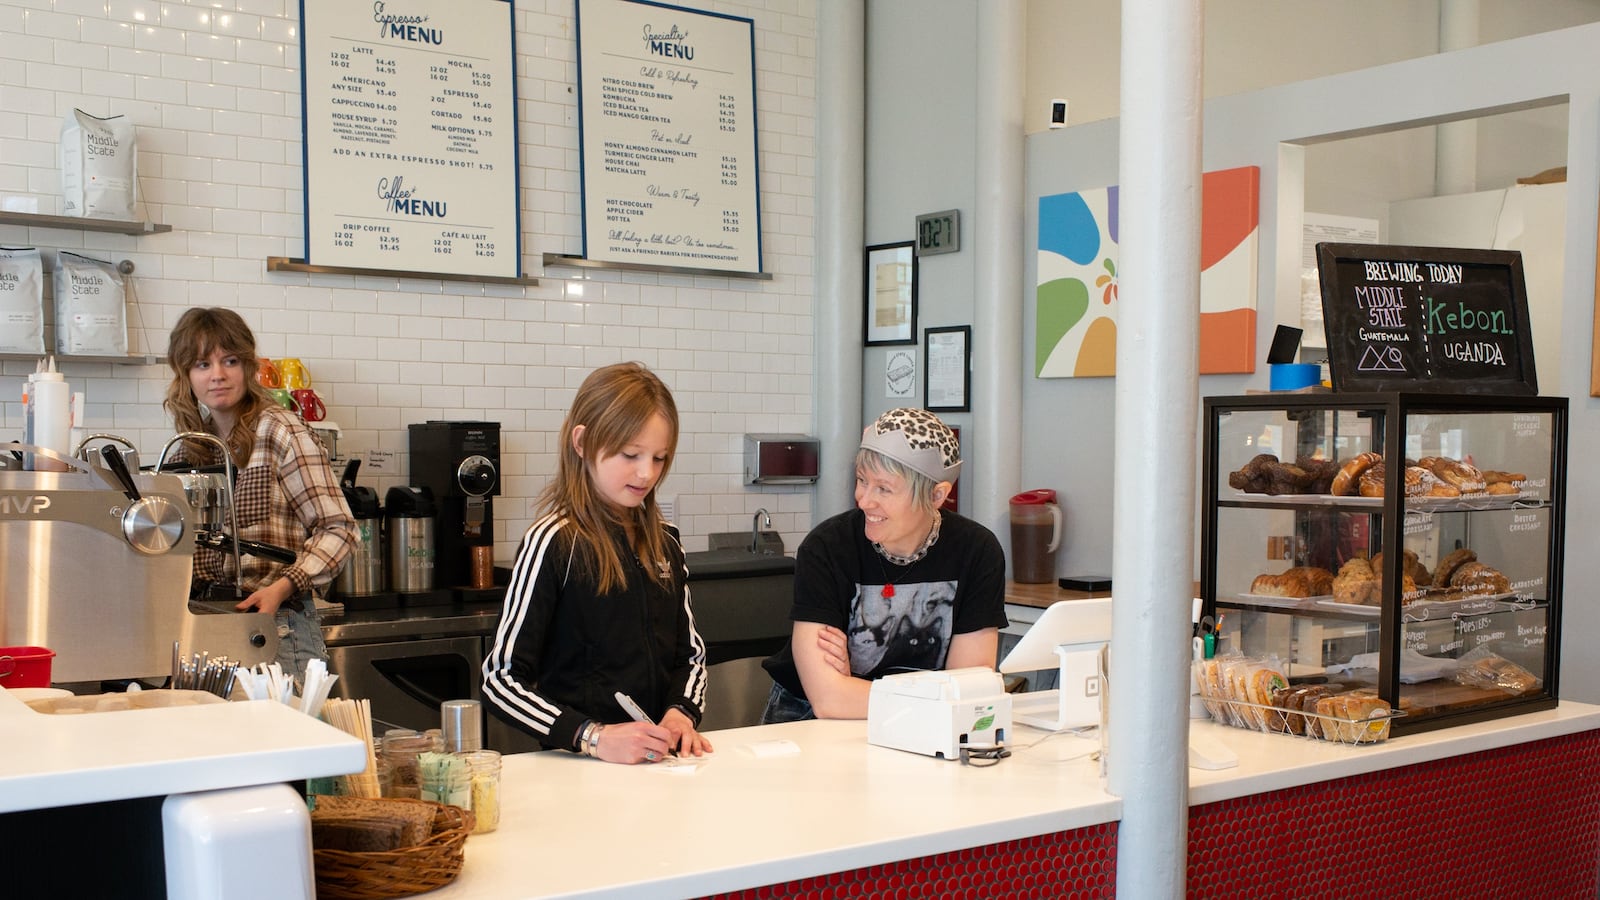 A 12-year-old girl with long straight hair writes on a piece of paper on the counter of a coffee shop. She’s behind the counter with two adult women. One of the women, with short, light hair and a snazzy crown, leans on the counter talking with the girl.